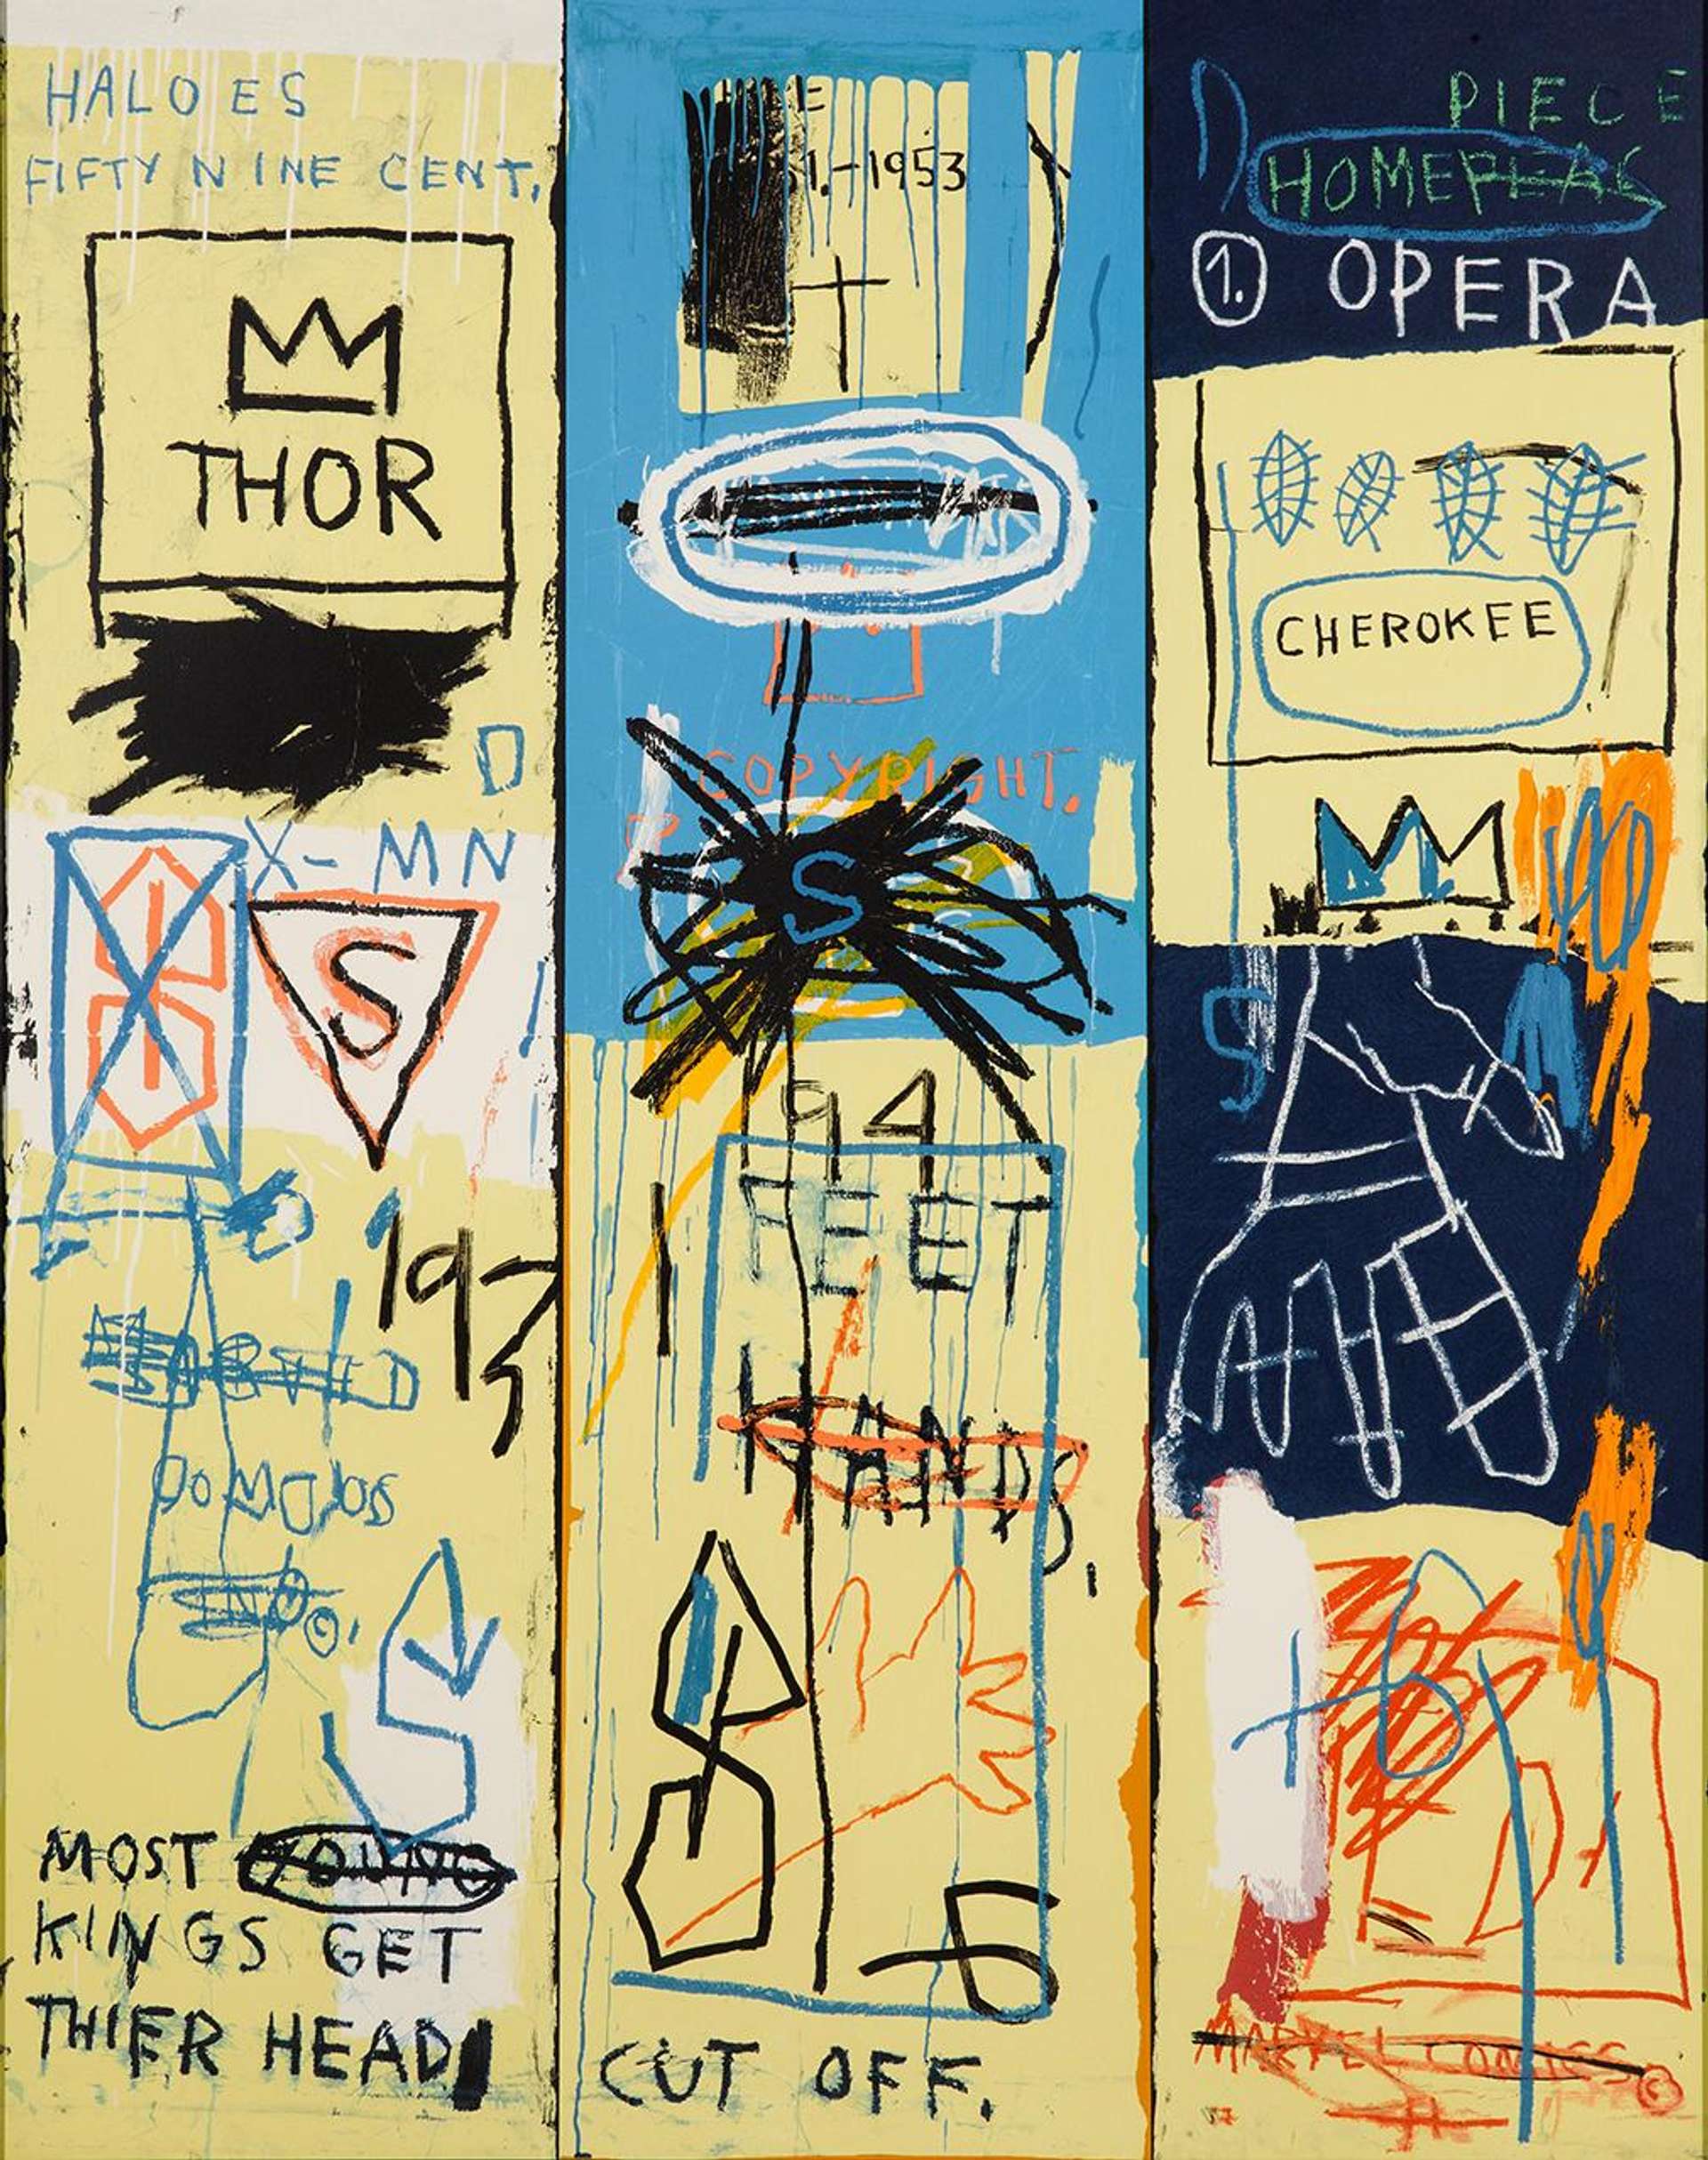 In this ode to musician Charlie Parker, a leading figure in the bebop scene which formed a fundamental inspiration for Basquiat’s own musical exploits, the artist once again aggrandizes the subject of the piece by adorning the image with crowns as well as other symbols and motifs signifying greatness.